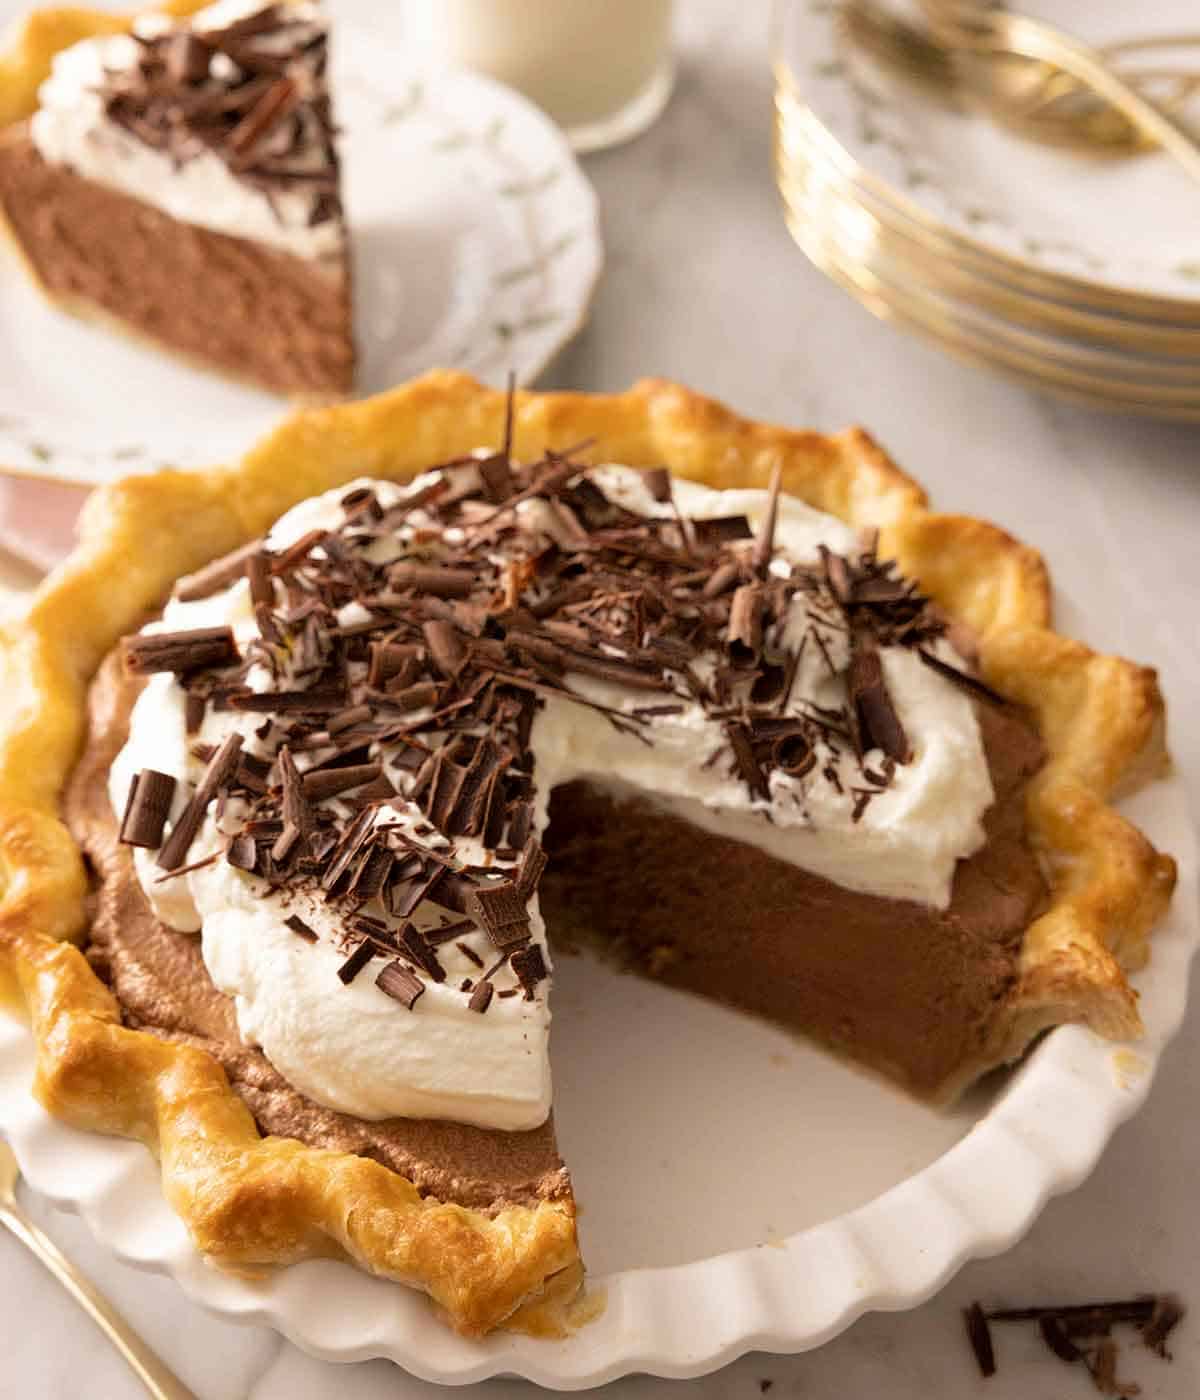 A pie dish containing French silk pie with a slice cut out.